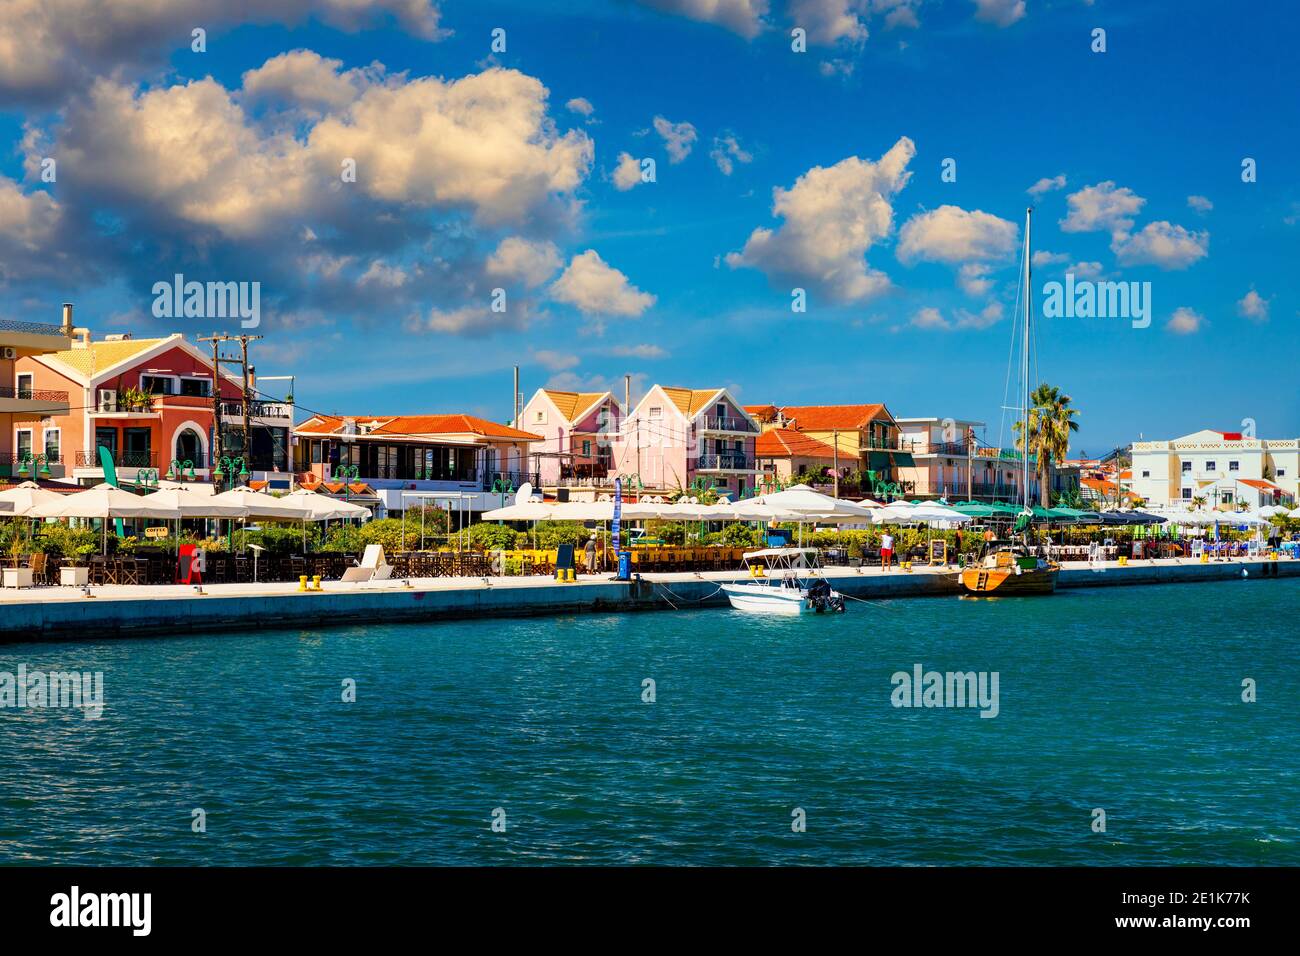 Lixouri is the second largest city of Kefalonia, Greece. View of city and port of Lixouri, Cefalonia island, Ionian, Greece. Stock Photo